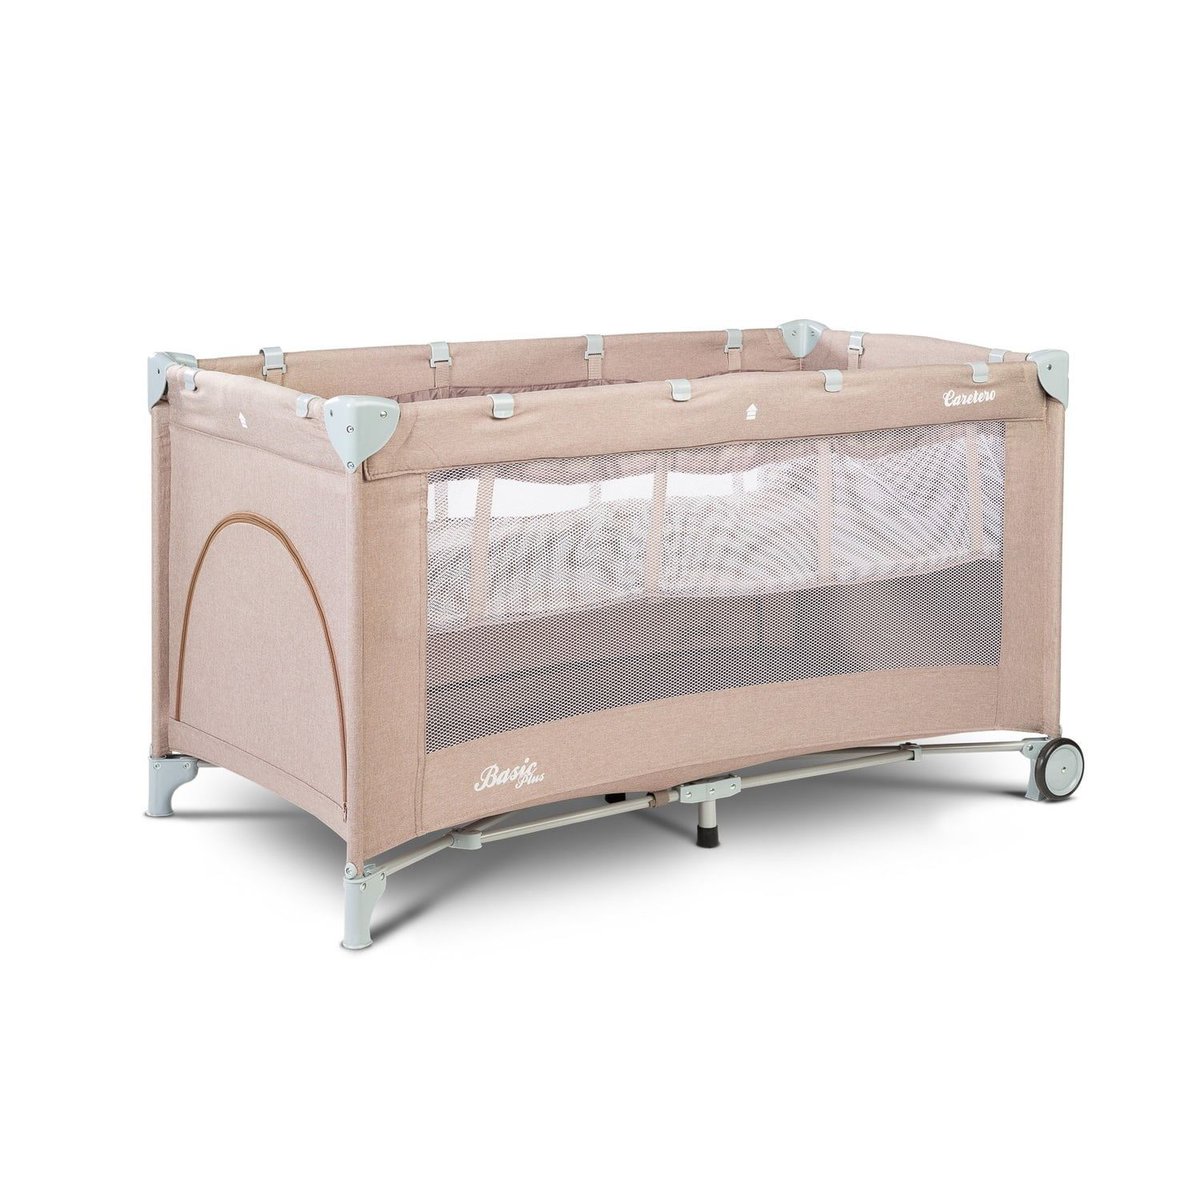 CARETERO Grand 2016 Travel cots up to 15 KG FREE SHIPPING 